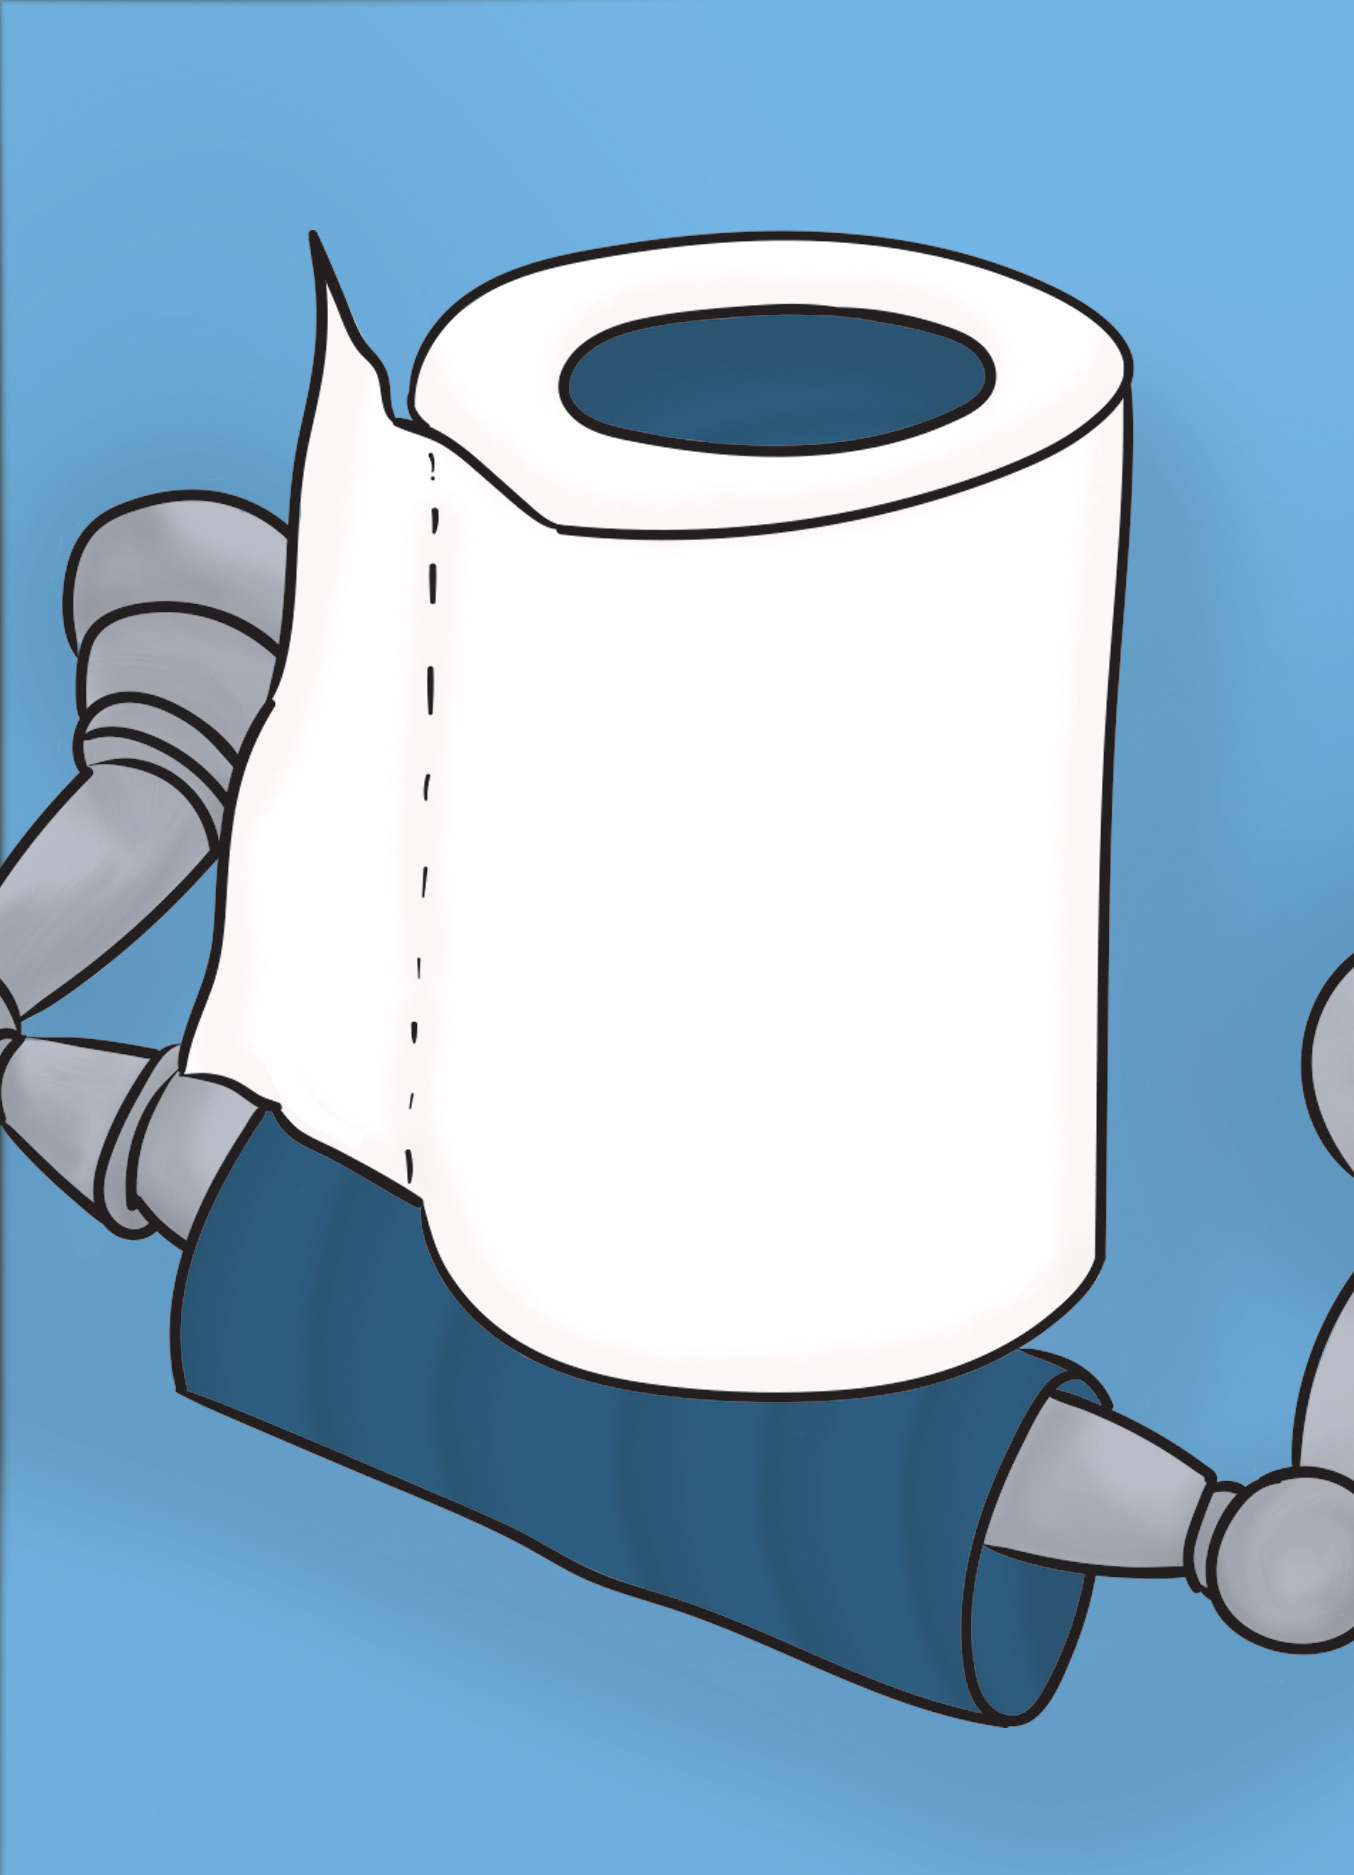 The toilet paper roll girth test